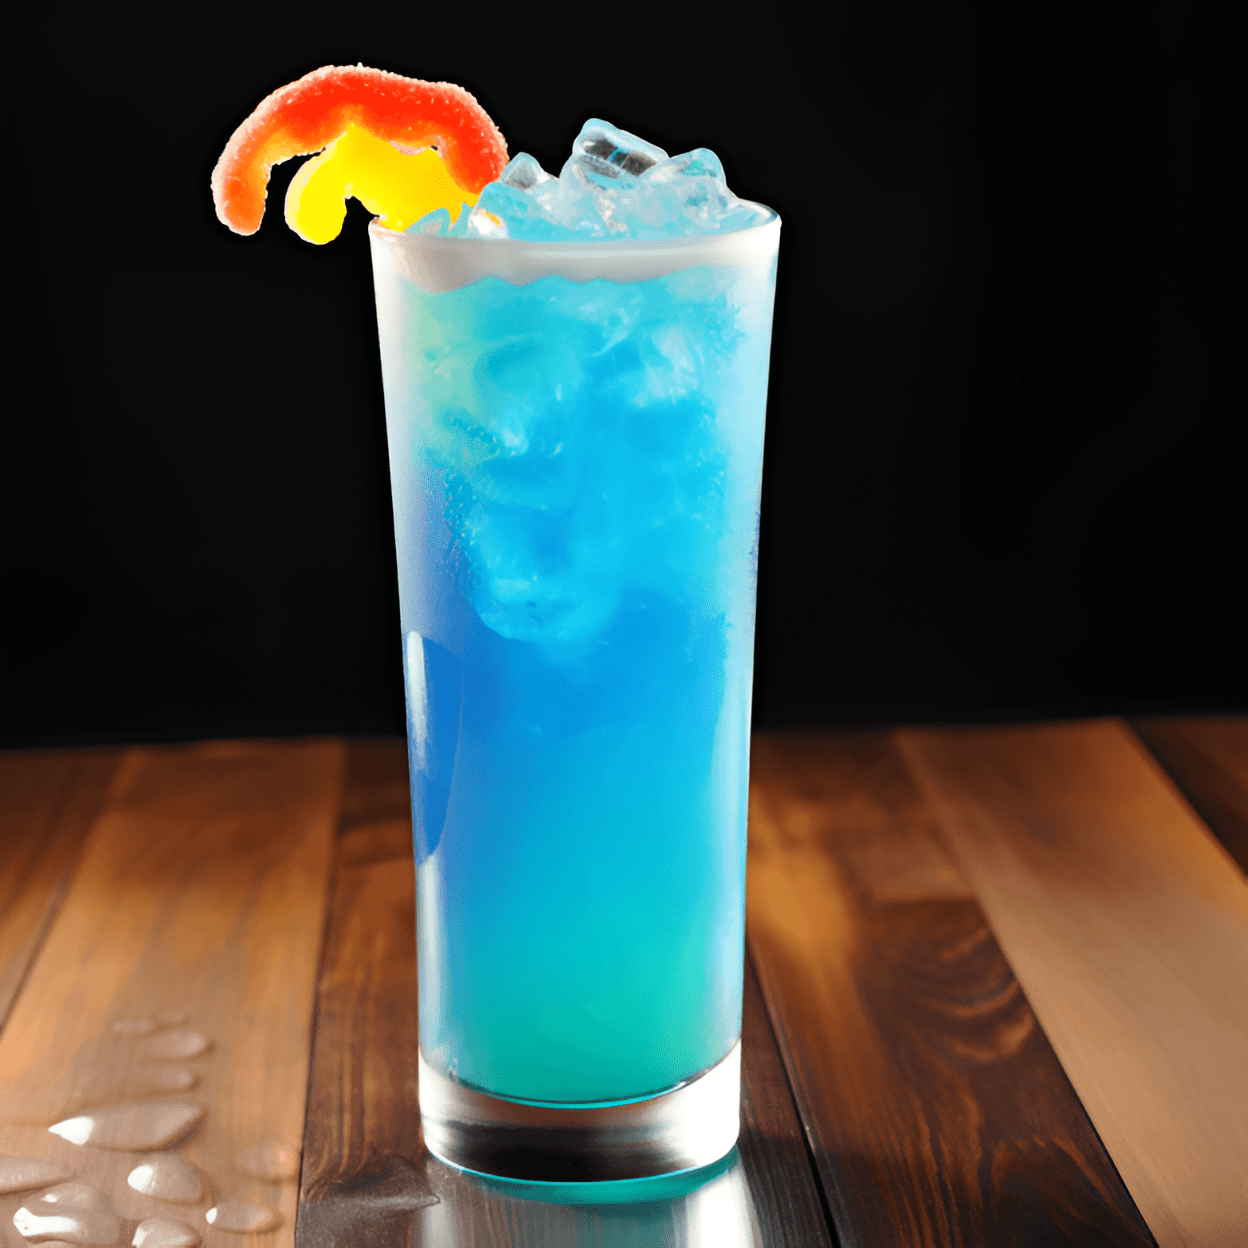 Sour Gummy Worm Cocktail Recipe - The Sour Gummy Worm Cocktail is a delightful mix of sweet and sour flavors. The tangy citrus notes are perfectly balanced by the sweetness of the gummy worms, resulting in a drink that's both refreshing and satisfying. It's a vibrant, playful, and delicious cocktail that's sure to delight your taste buds.